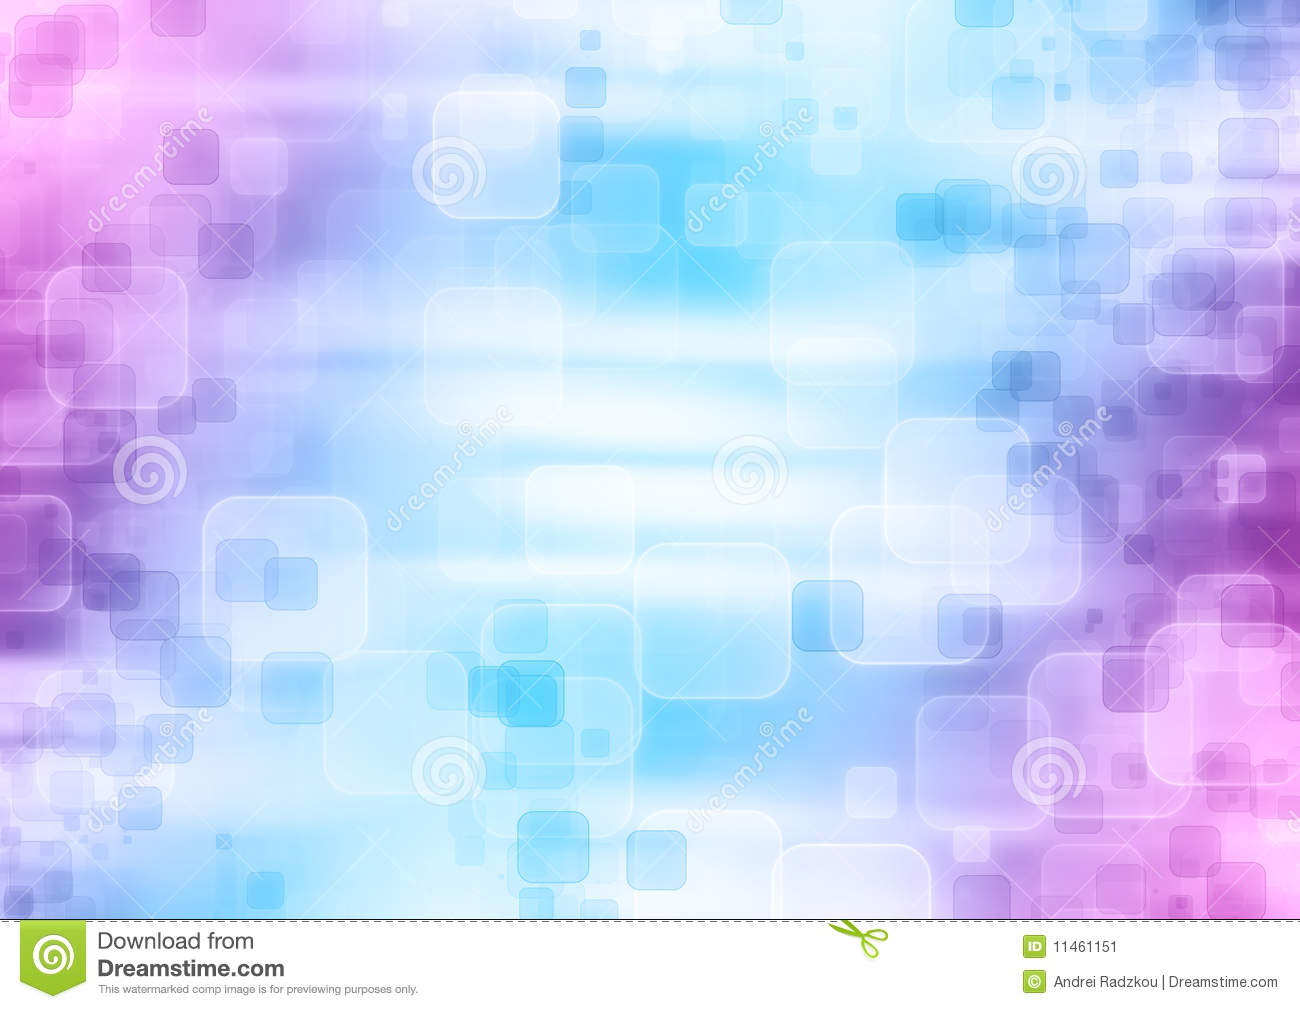 Light Color Background Images   Widescreen HD Wallpapers